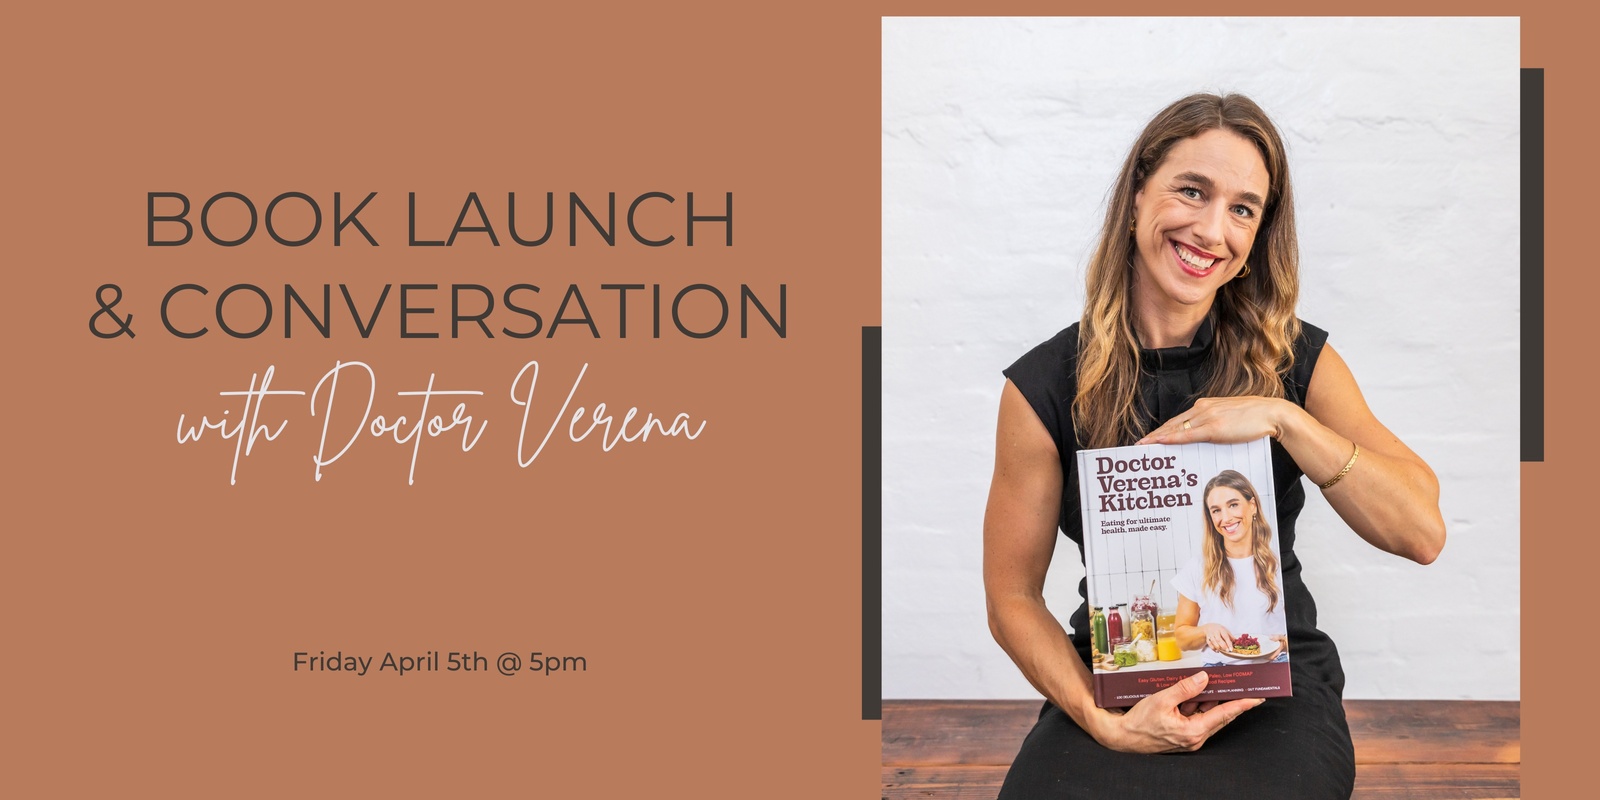 Banner image for Book Launch & Conversation with Doctor Verena